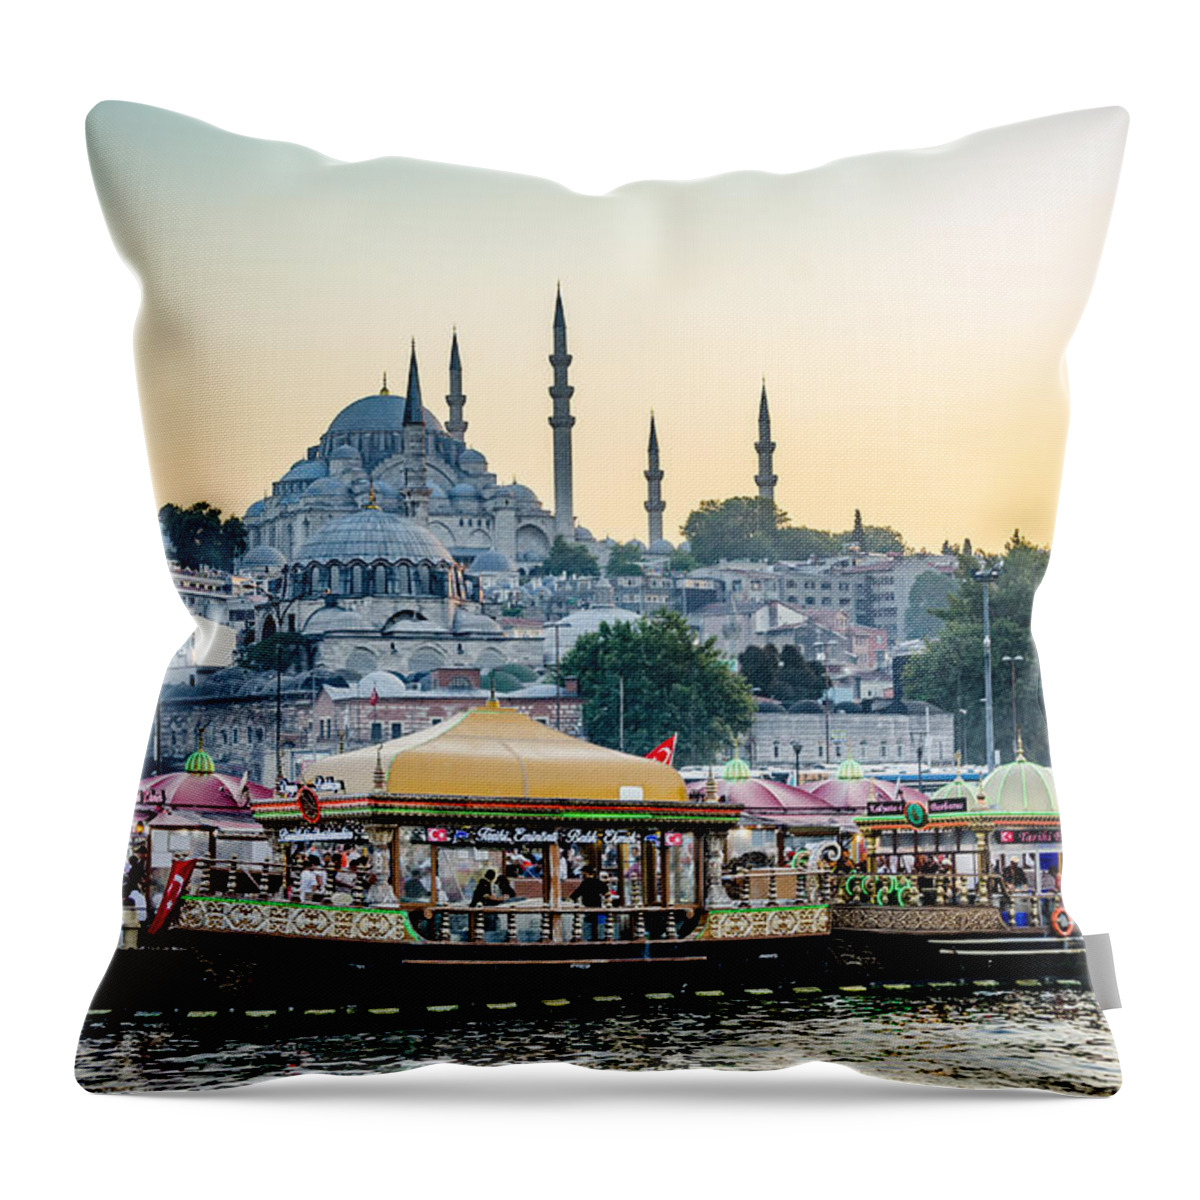 Suleymaniye Throw Pillow featuring the photograph Suleymaniye Mosque at Sunset by Anthony Doudt